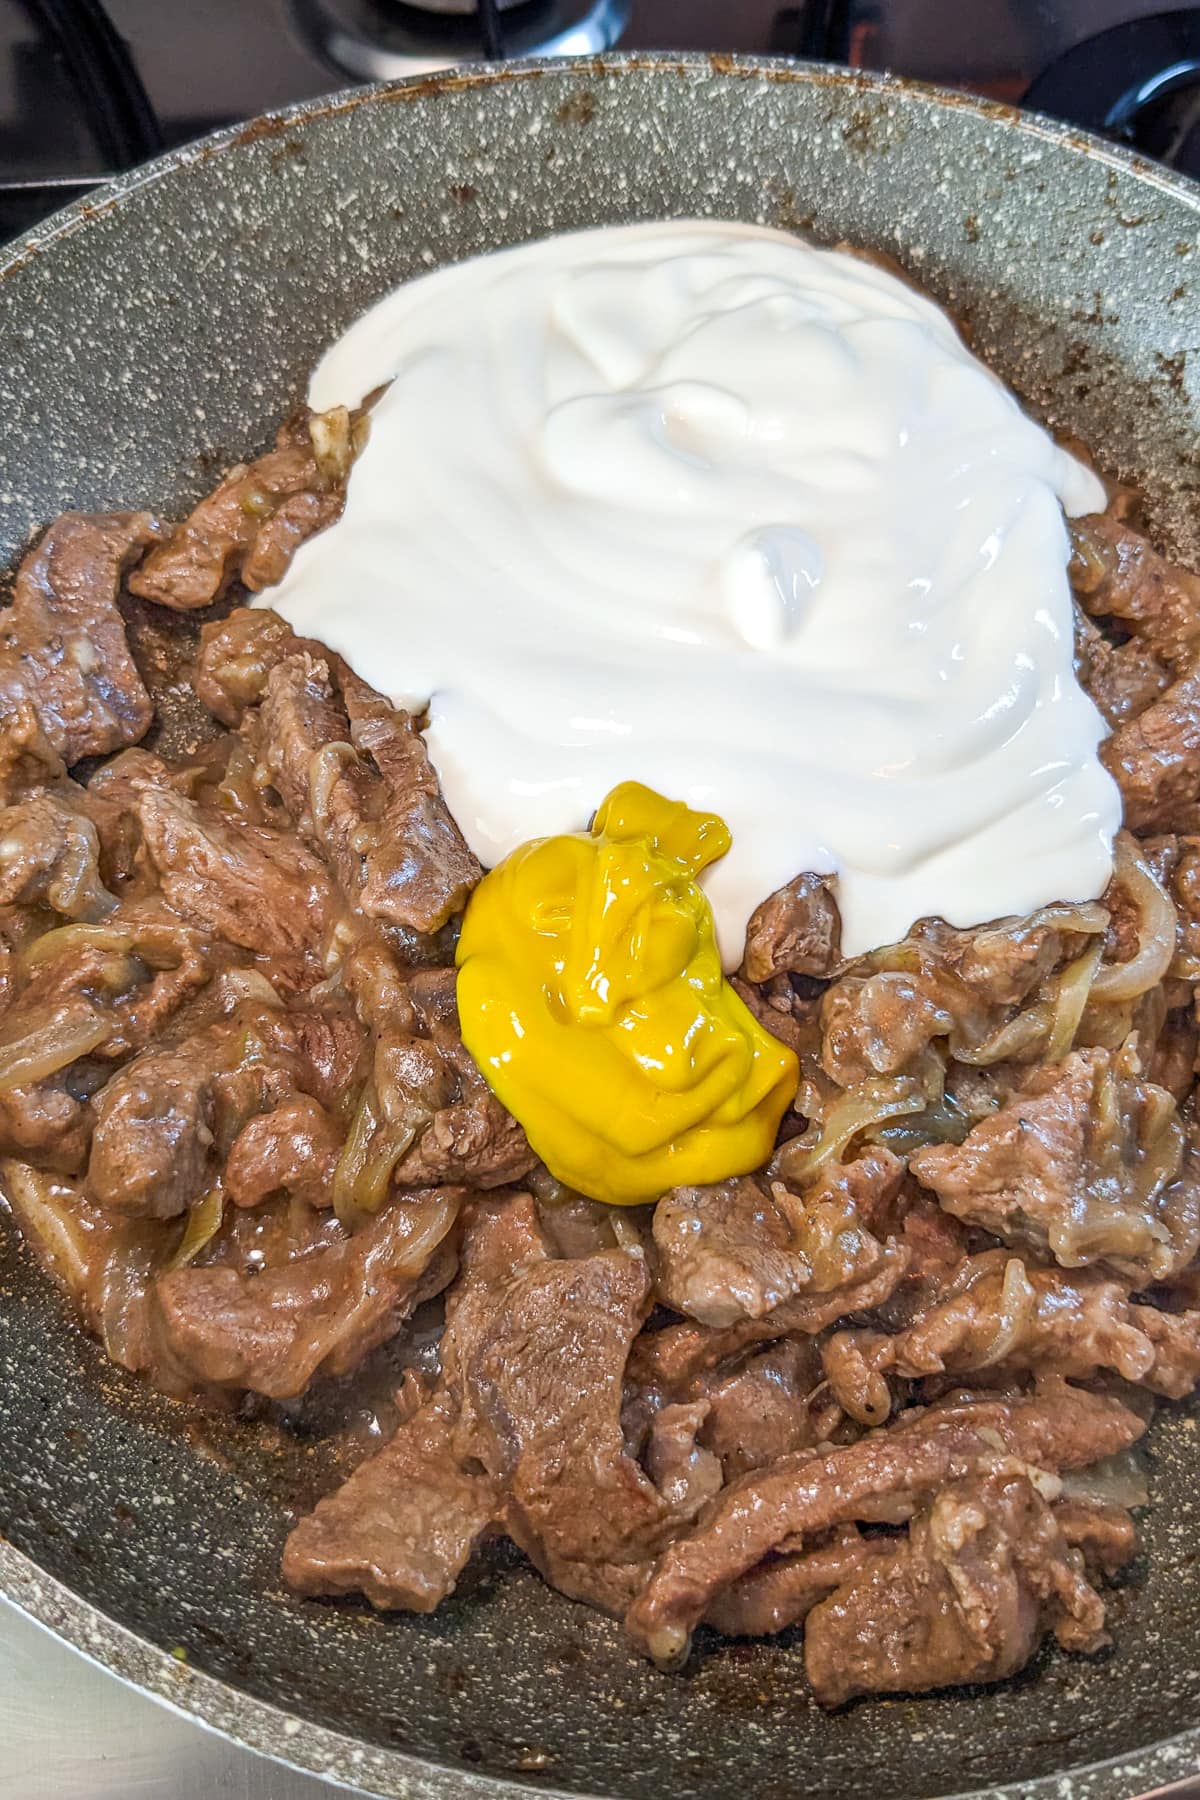 Sour cream and mustard over cooked slices of beef and onions.